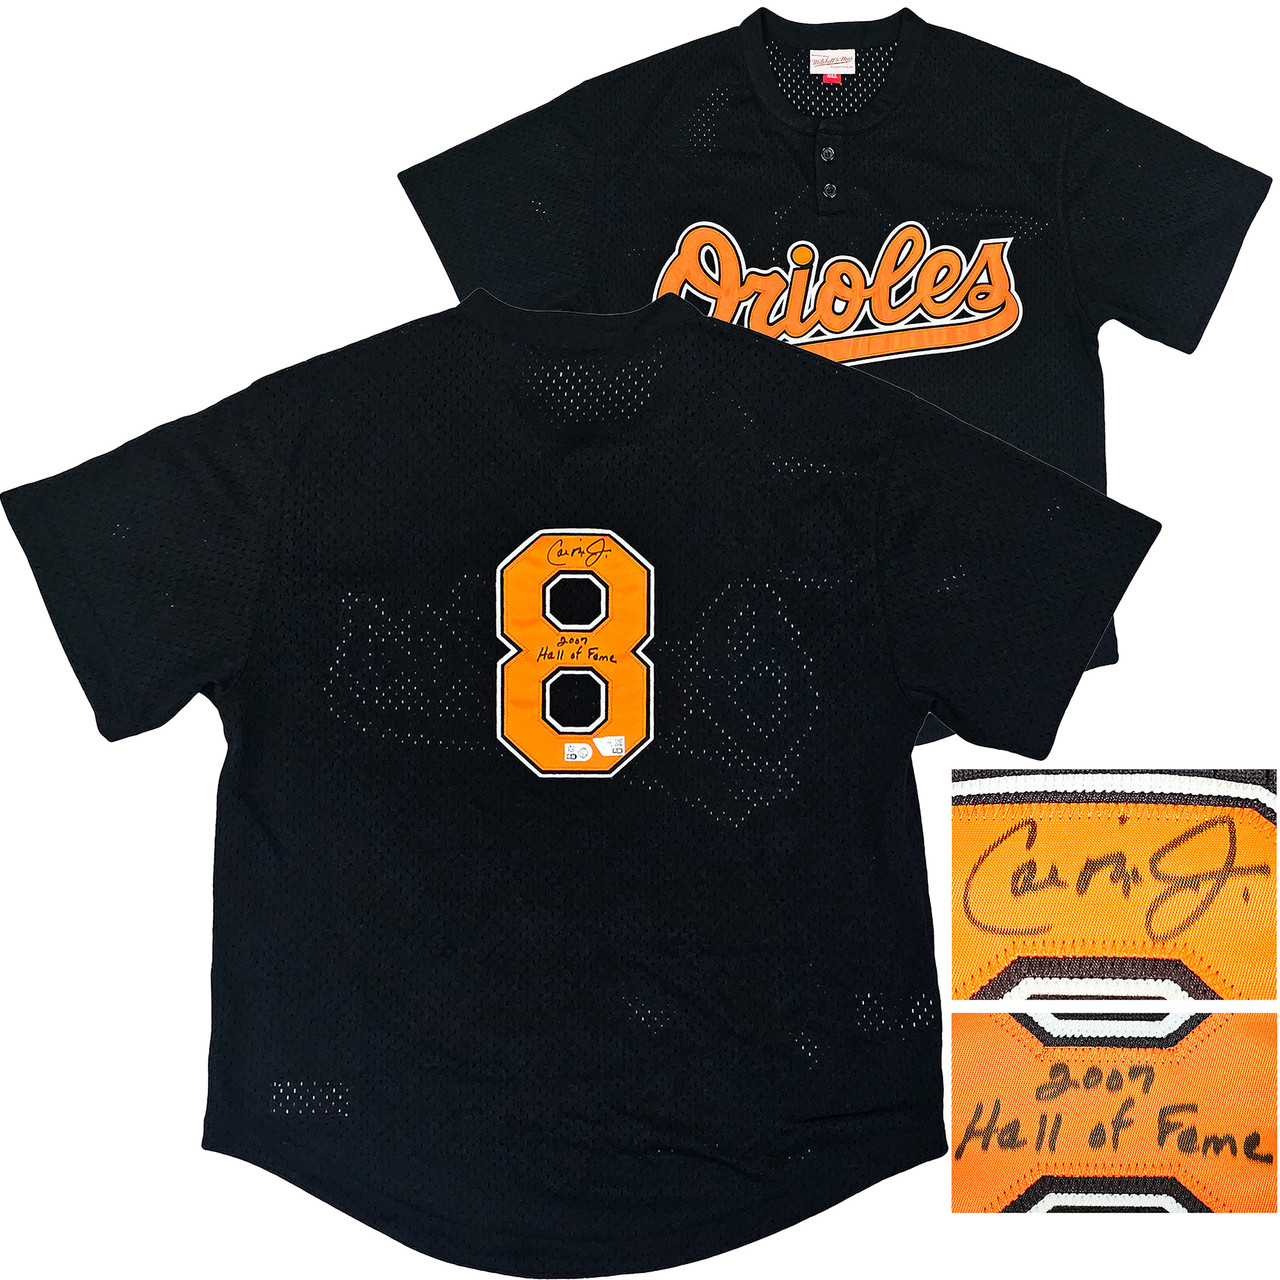 Fanatics Authentic Cal Ripken Jr. White Baltimore Orioles Autographed Mitchell & Ness Replica Jersey with 2007 Hall of Fame Inscription